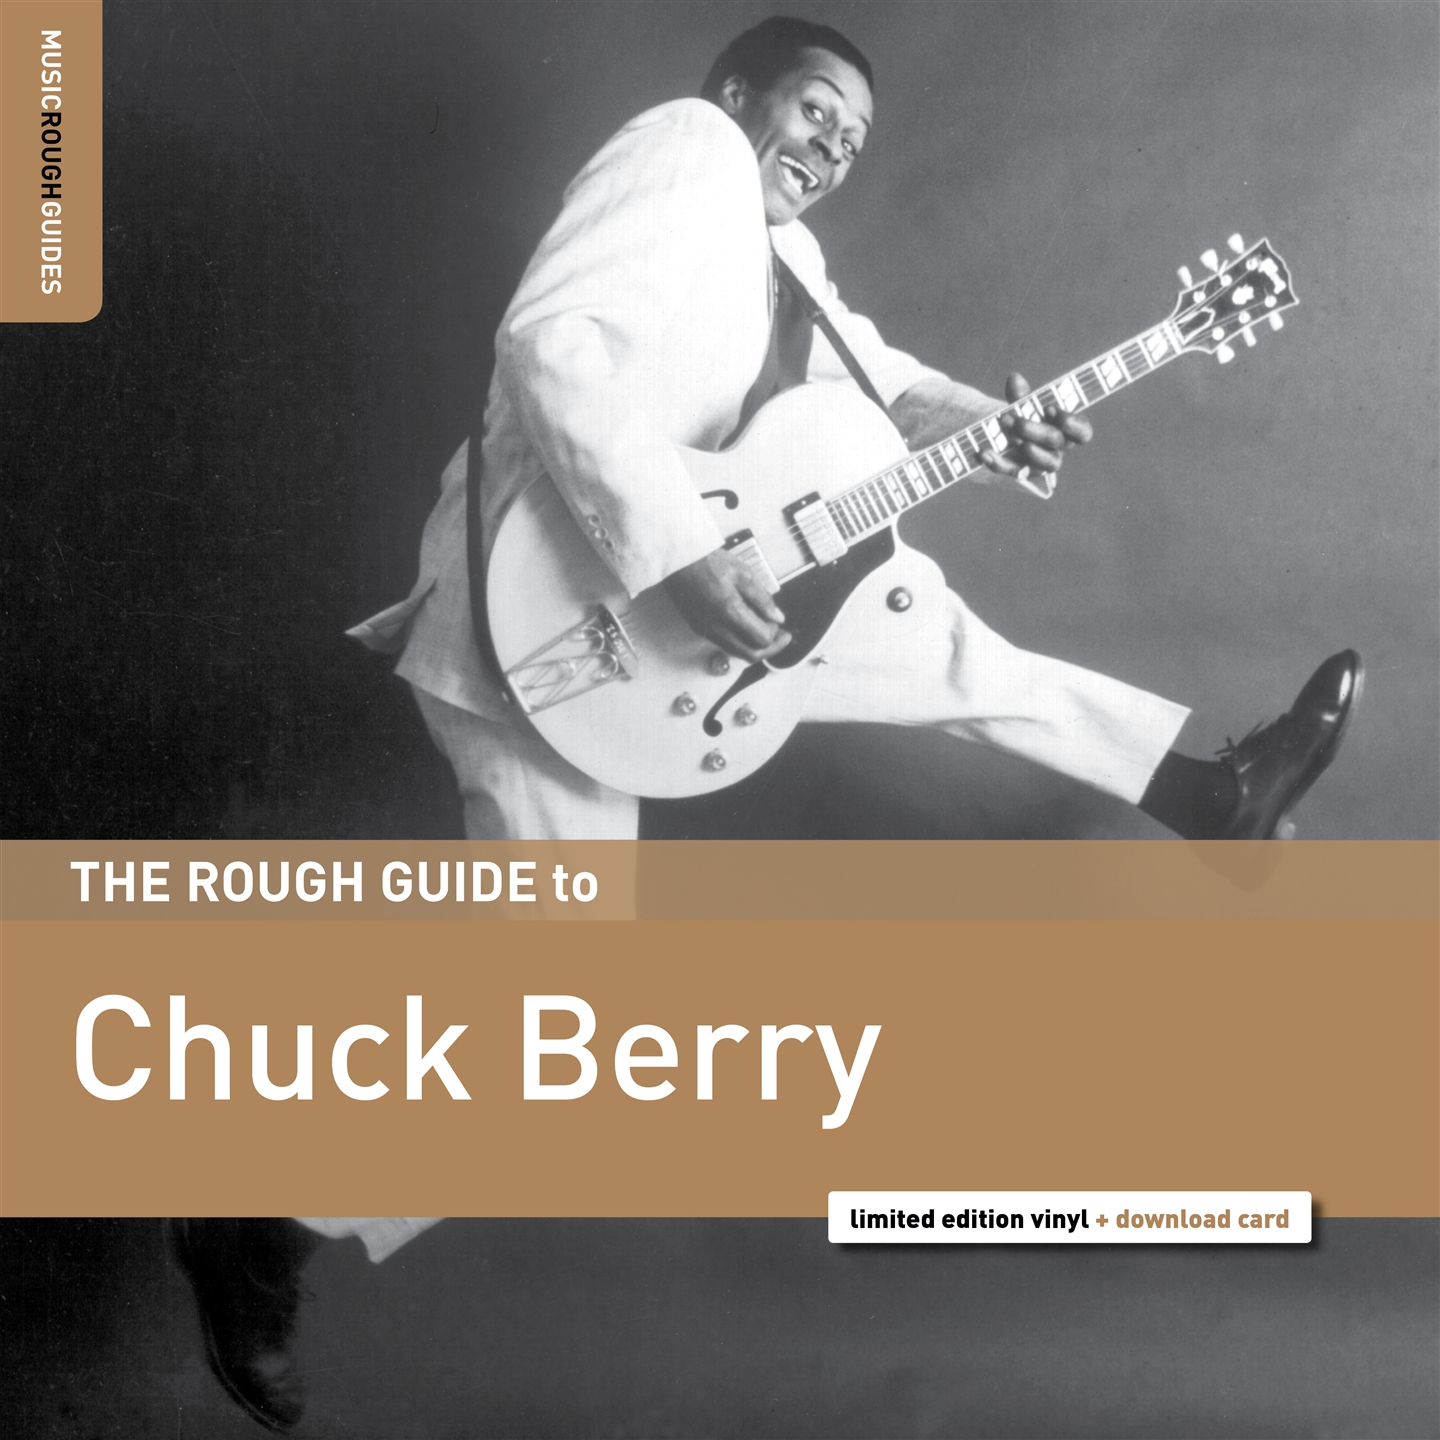 THE ROUGH GUIDE TO CHUCK BERRY [LP]